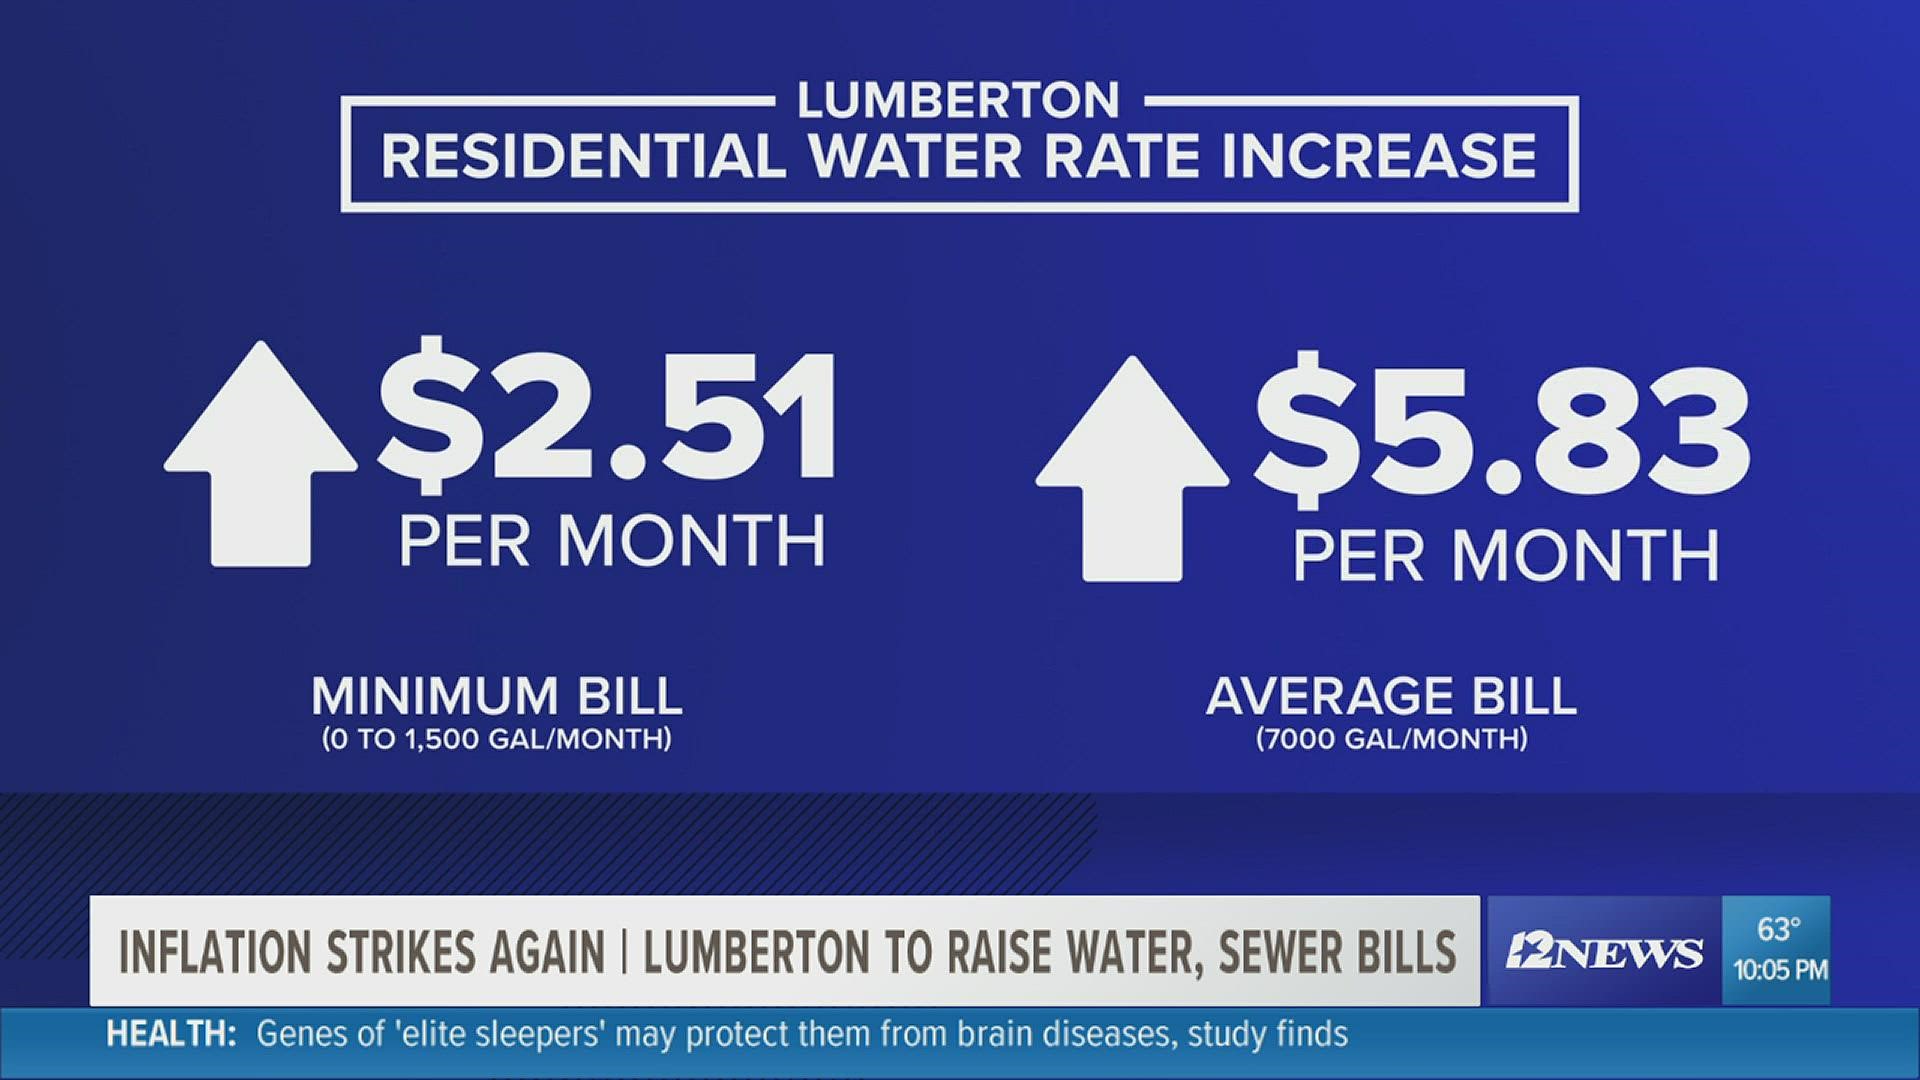 Starting April 4, 2022, the water rate and fees for Lumberton Municipal Utility District customers will increase.